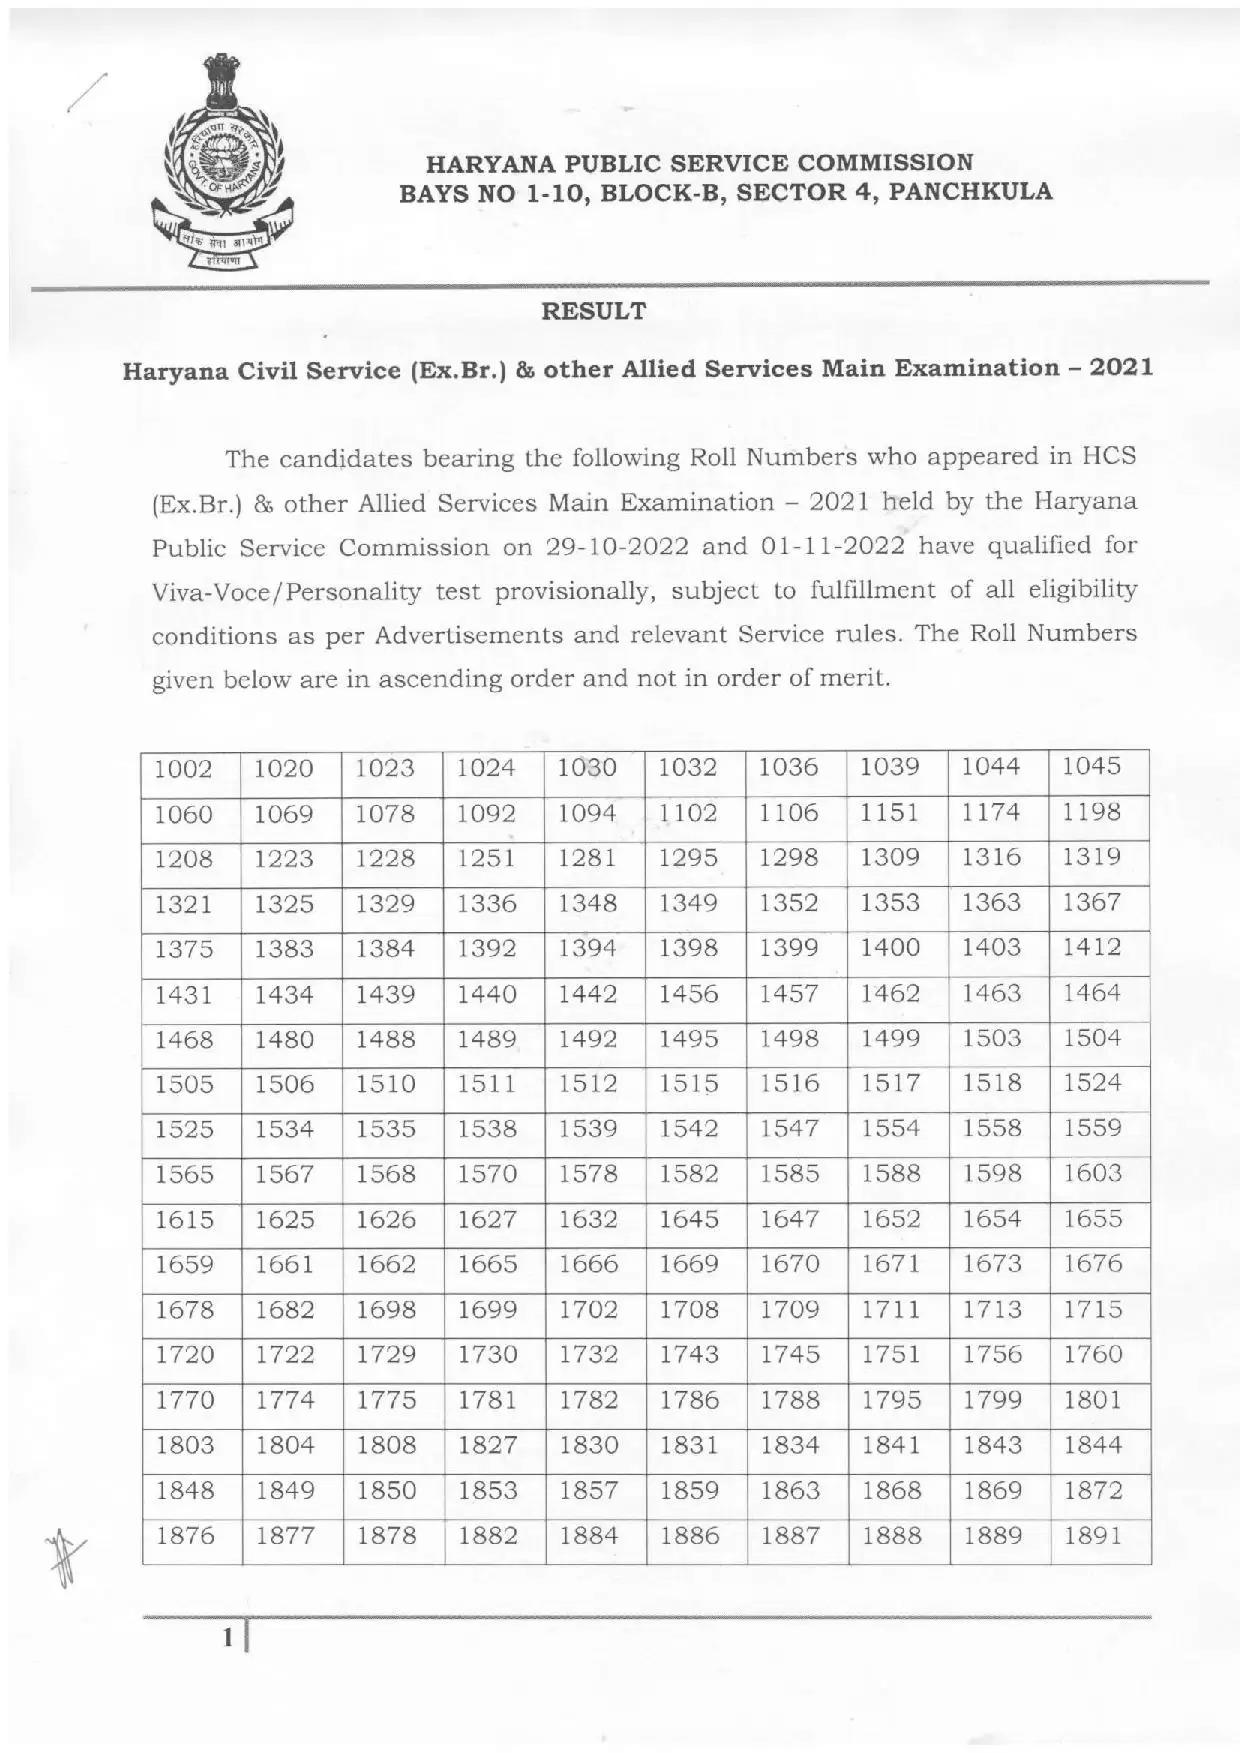 Mains_Result_HCS_Ex_Br_17.01.2023-page-001